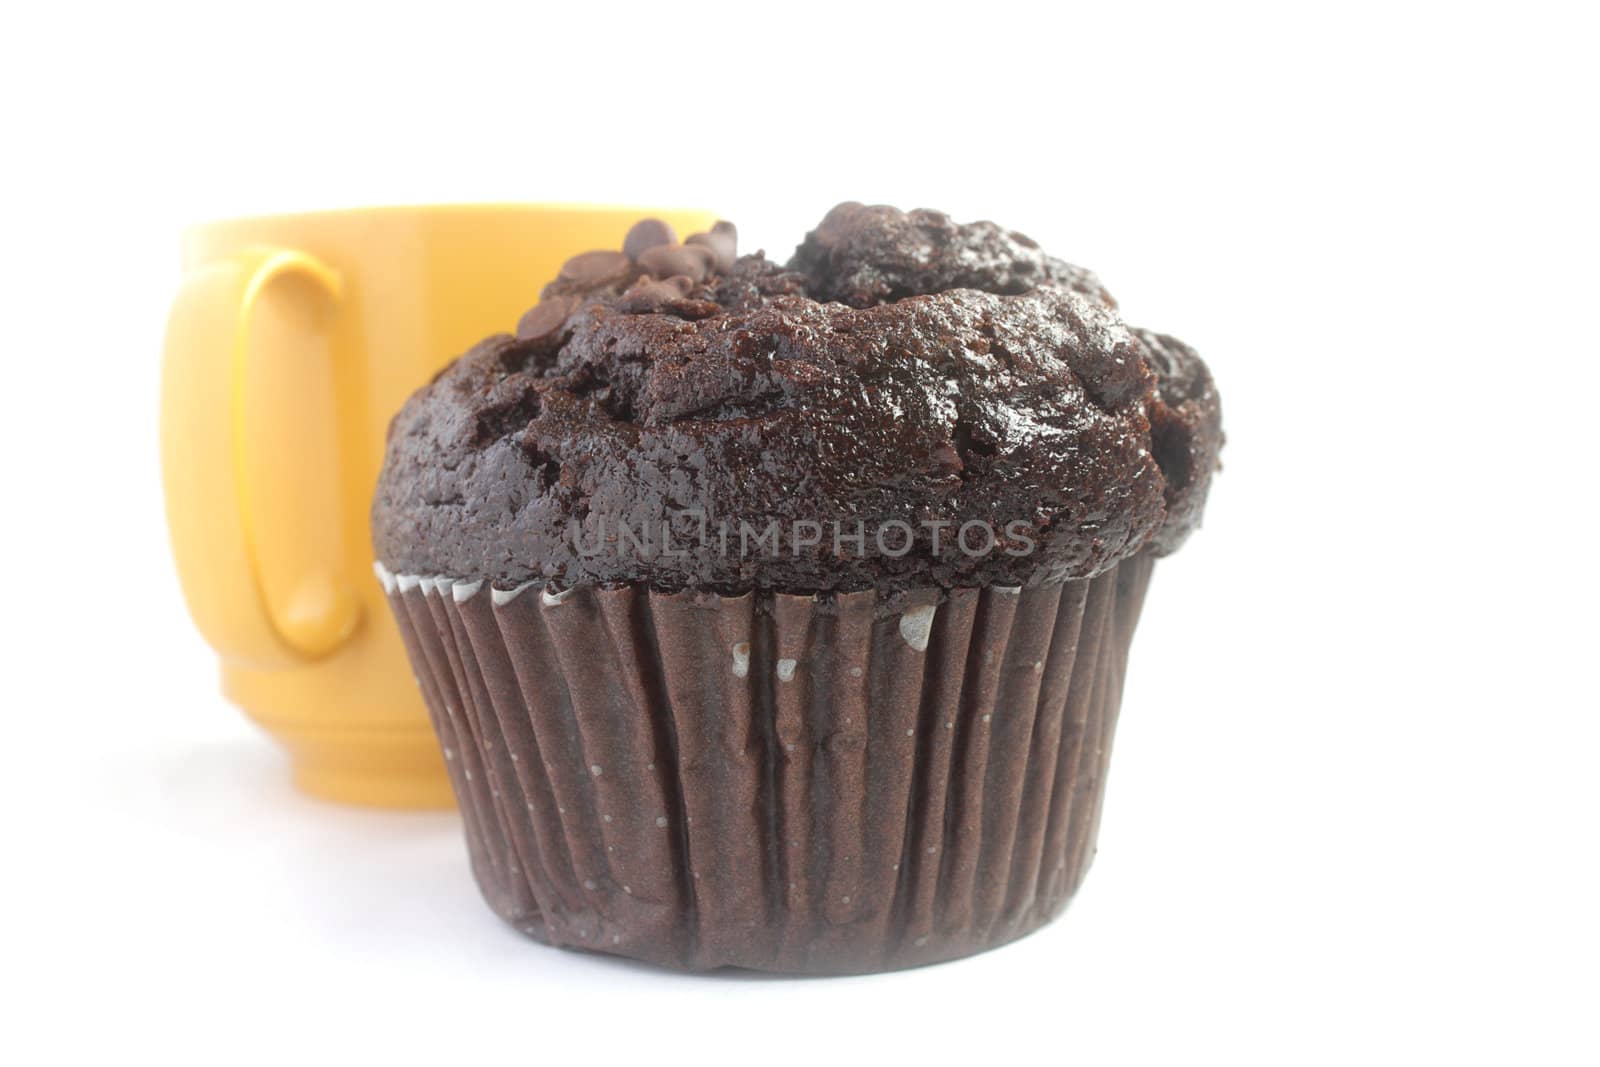 Chocolate muffin and a yellow cup of tea isolated on white background